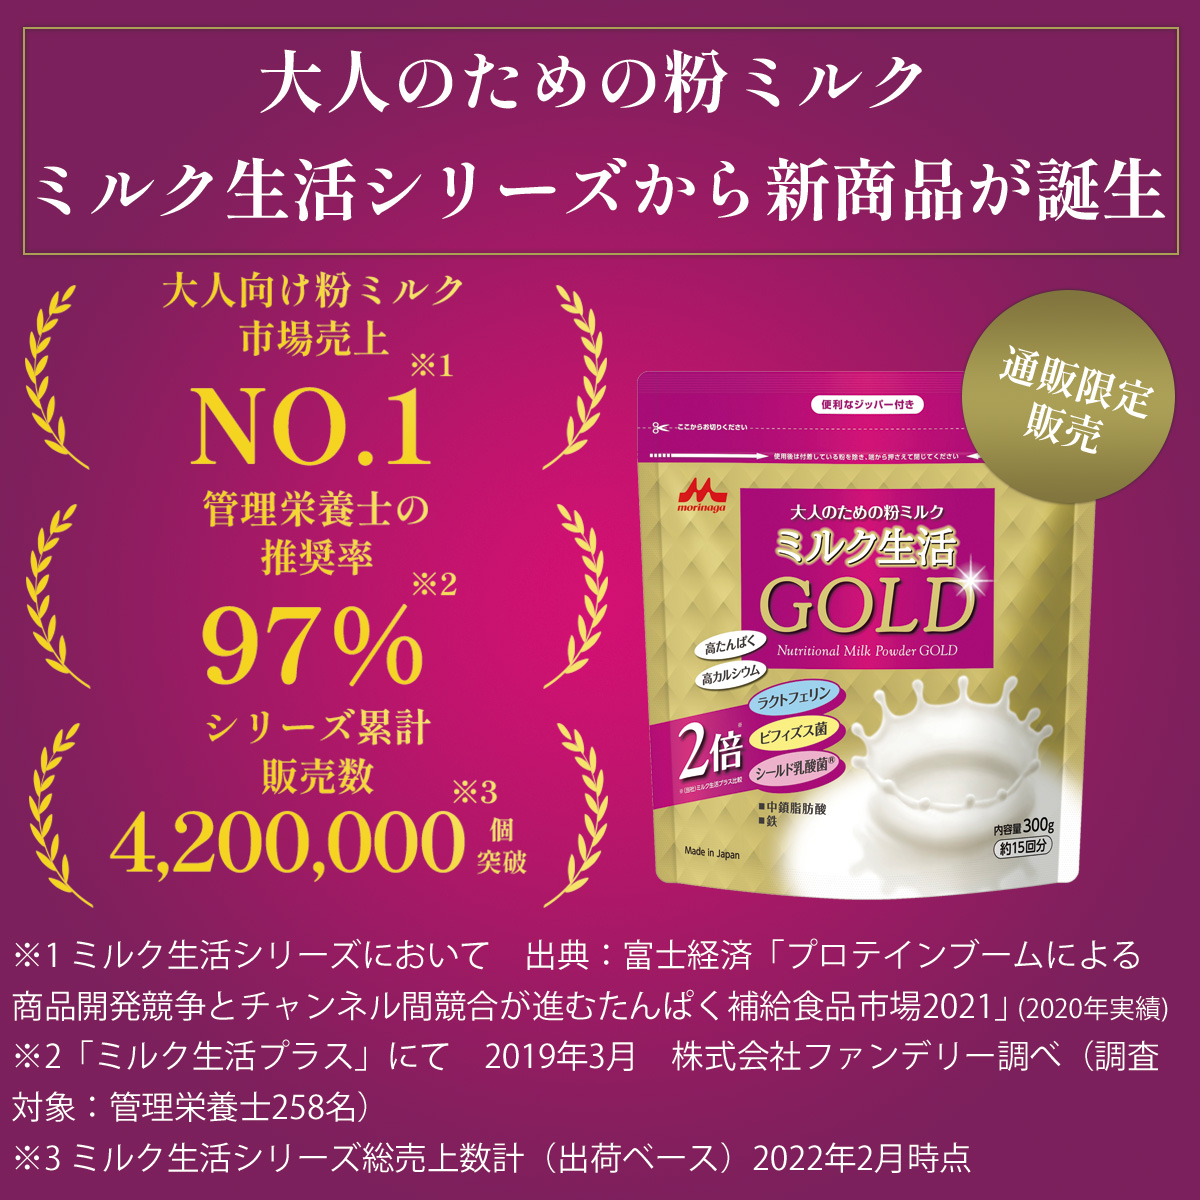  forest .. industry official adult therefore. flour milk milk life GOLD 300g( approximately 15 batch ) 3 sack set 